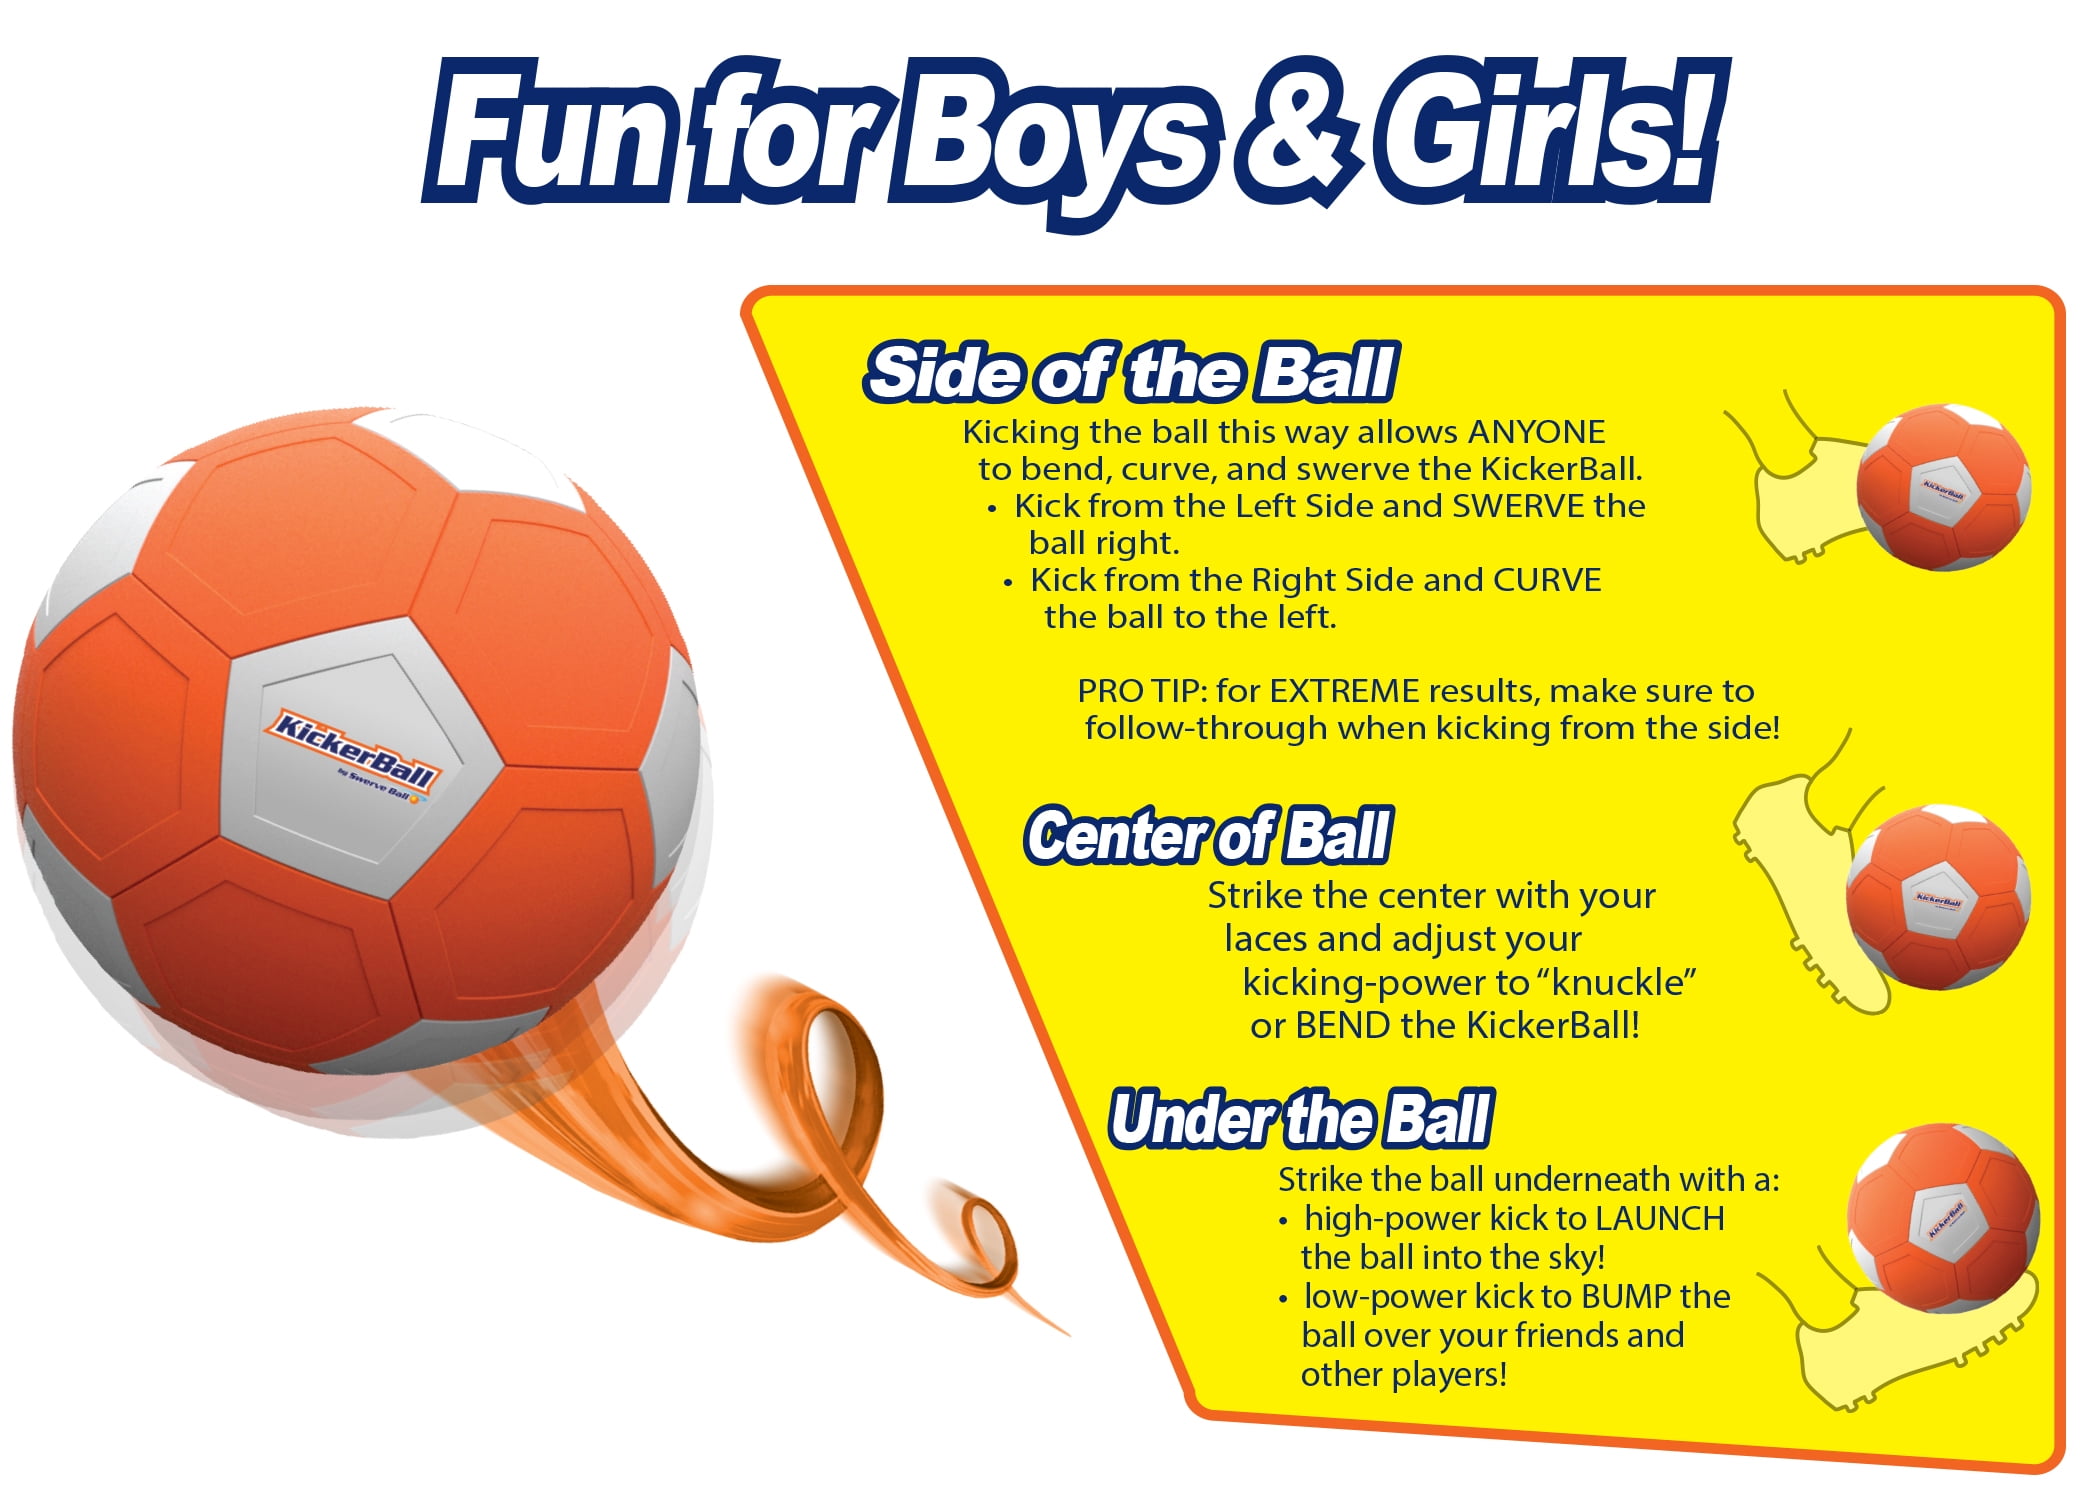 Kickerball by Swerve Ball The Soccer Ball that Curves and Swerves when Kicked